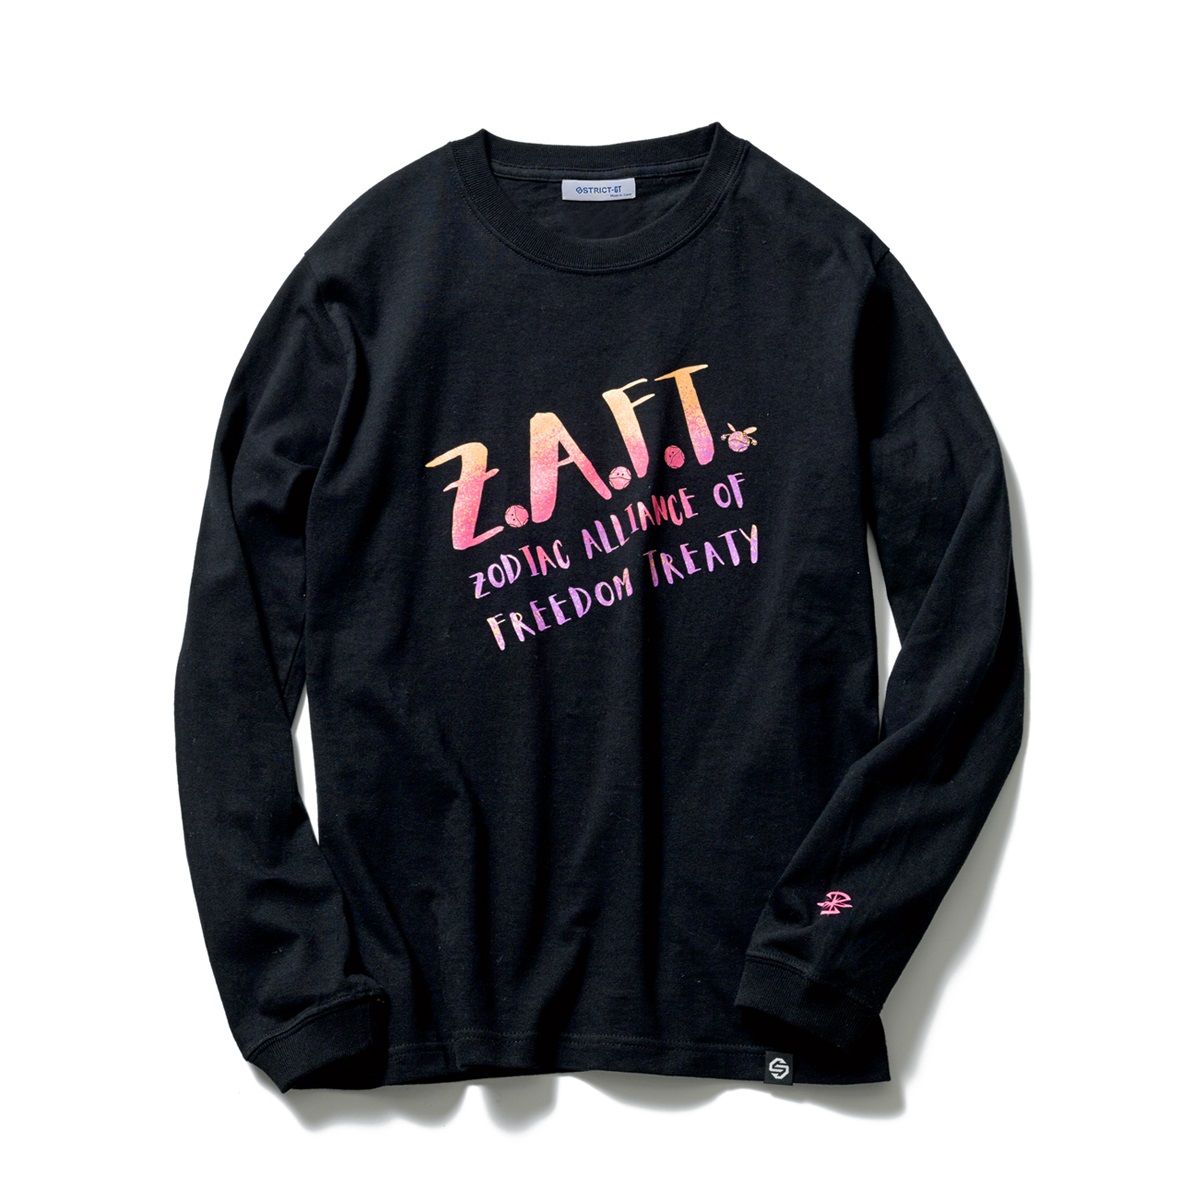 ZAFT Long-Sleeve T-shirt—Mobile Suit Gundam SEED/STRICT-G Collaboration